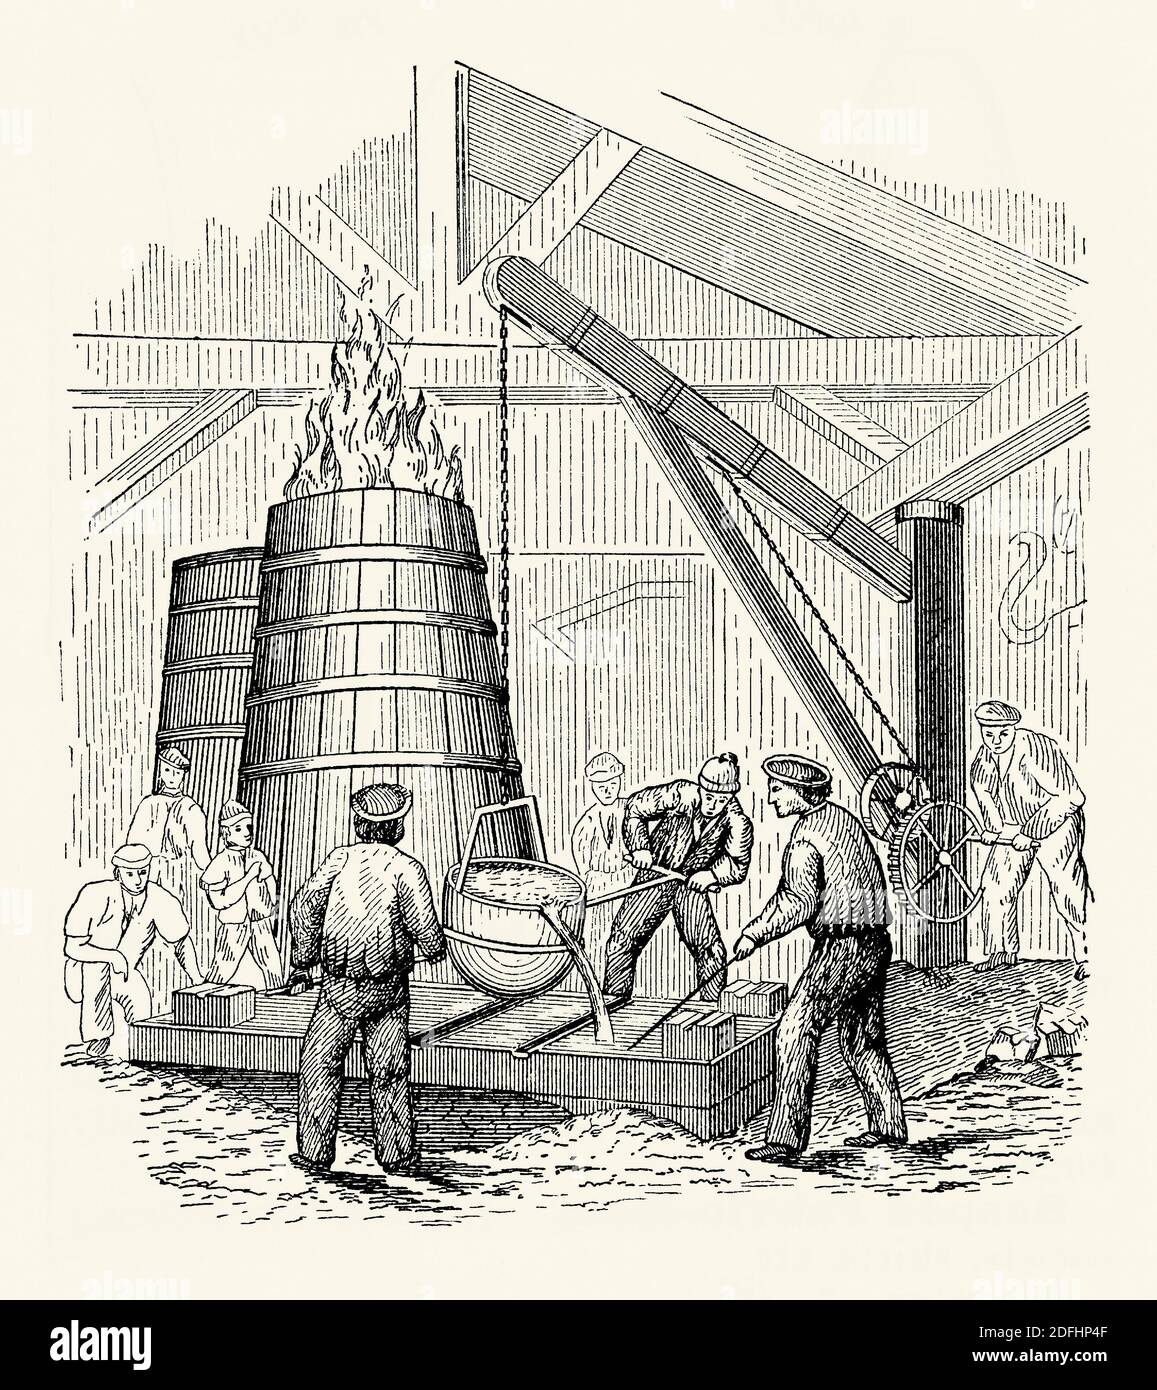 An old engraving of workers using a ‘shank’ in a metal foundry. It is from a Victorian mechanical engineering book of the 1880s. A shank (bull ladle) is a device for carrying molten iron or other metals. It is carried from the furnace by two workers holding handles at each end of a cross-bar (crutch). This could be tipped to pour the molten metal. This large version also requires the assistance of a crane. Stock Photo